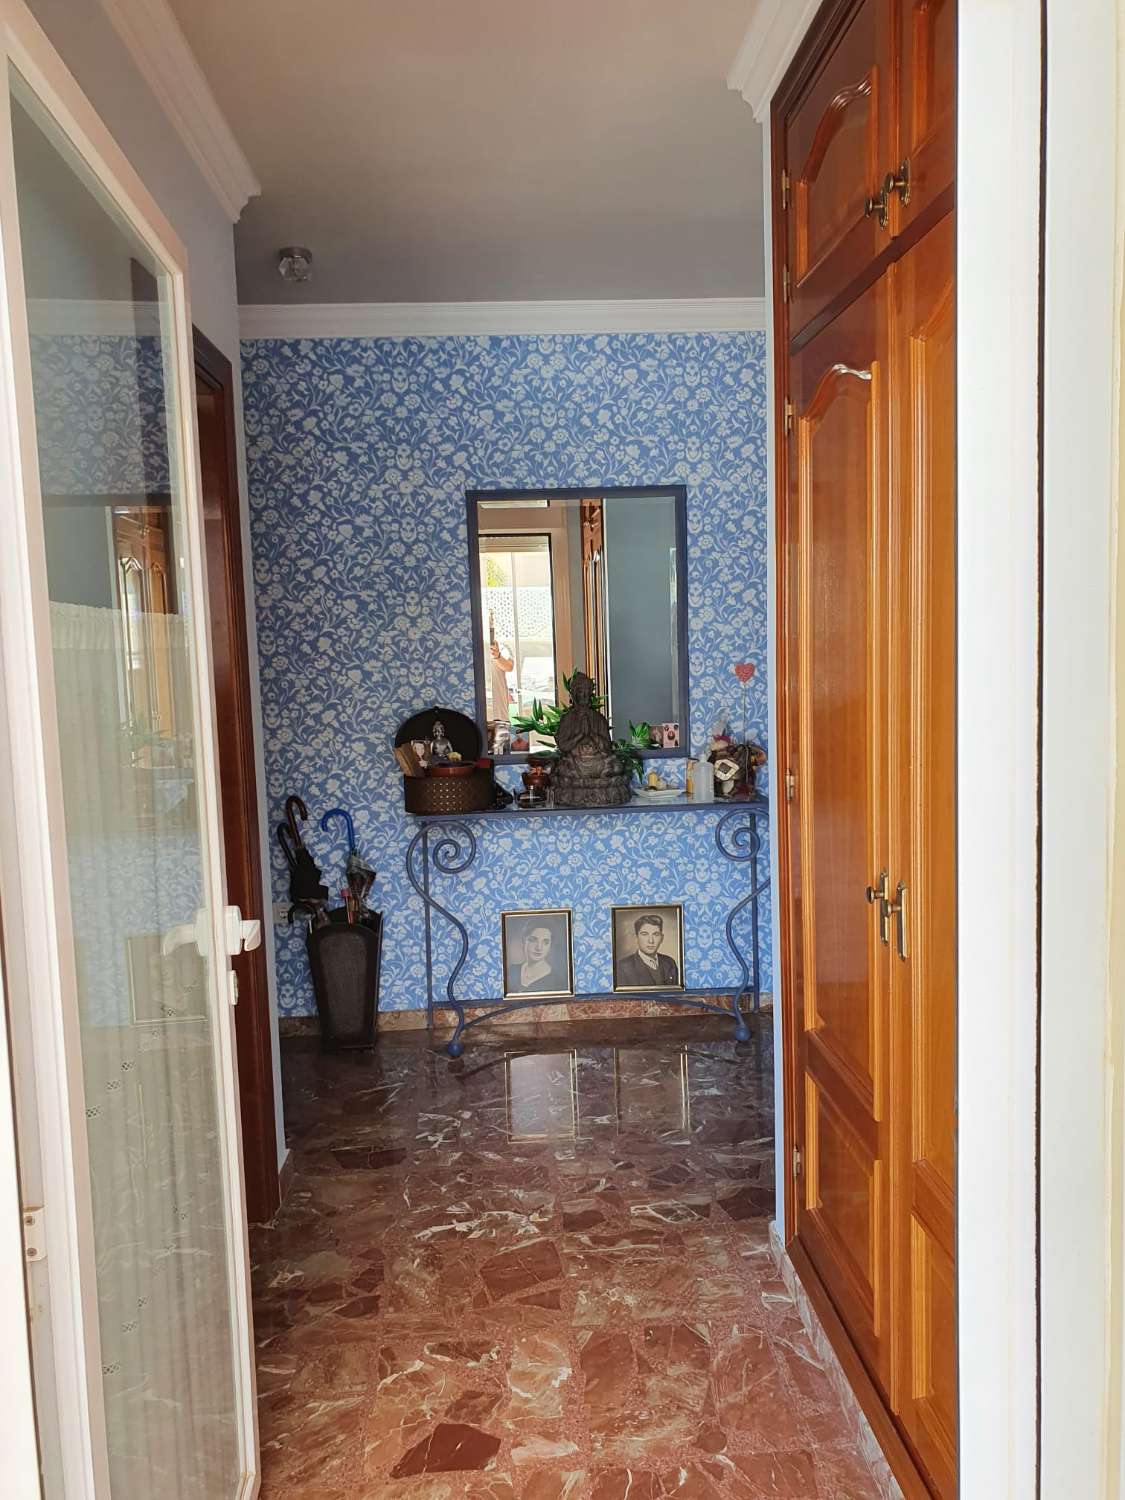 Great semi-detached house for sale in Torre del Mar.